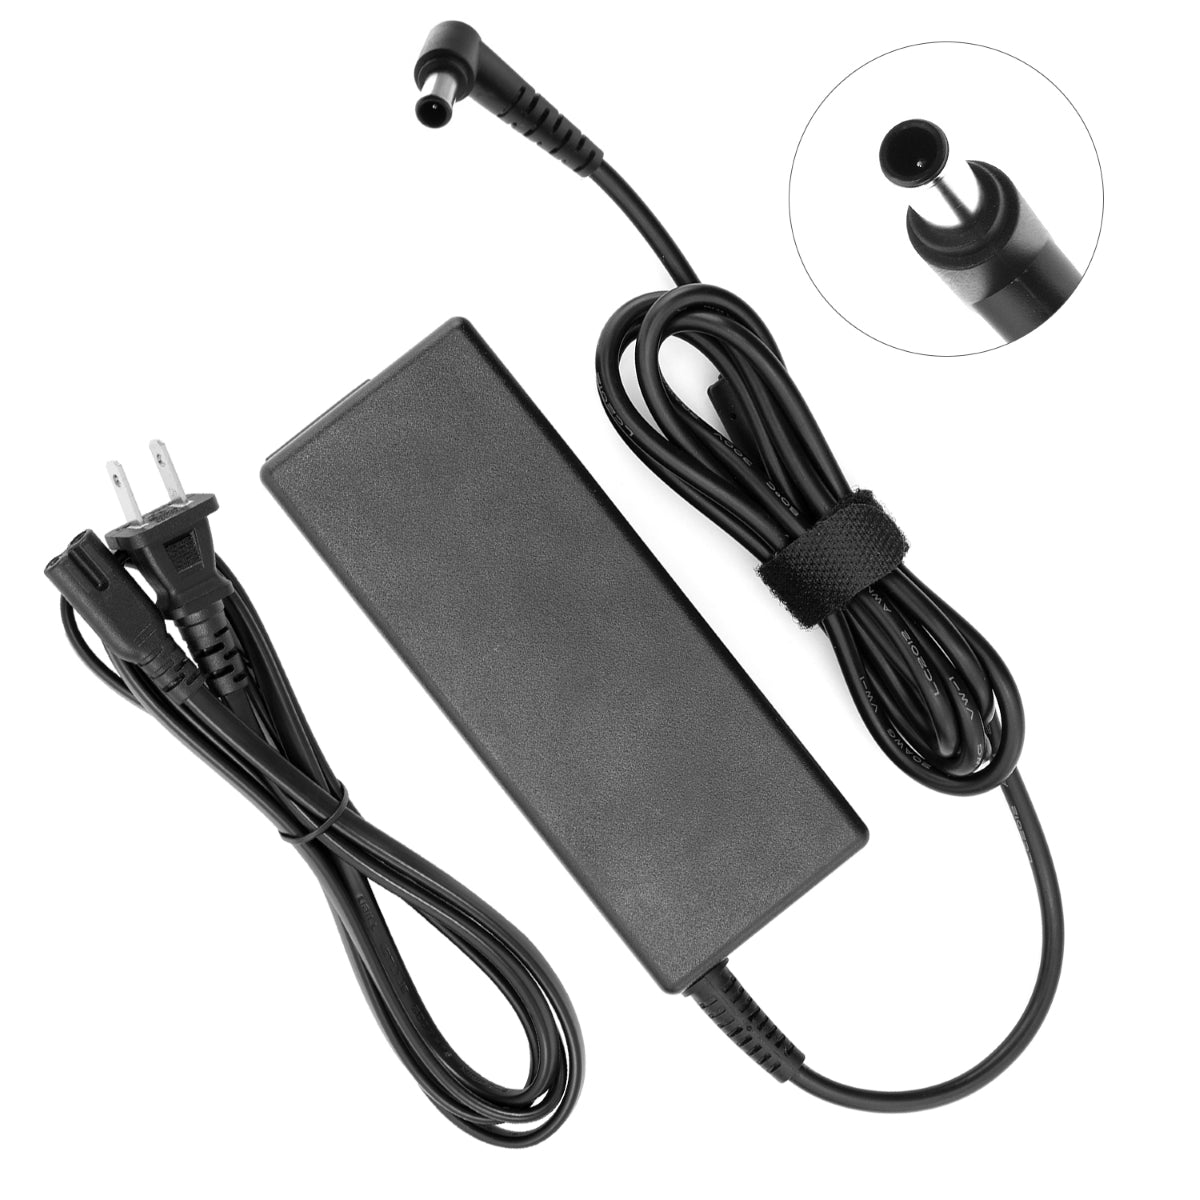 AC Adapter Power Supply for Samsung SYNCM760V Monitor